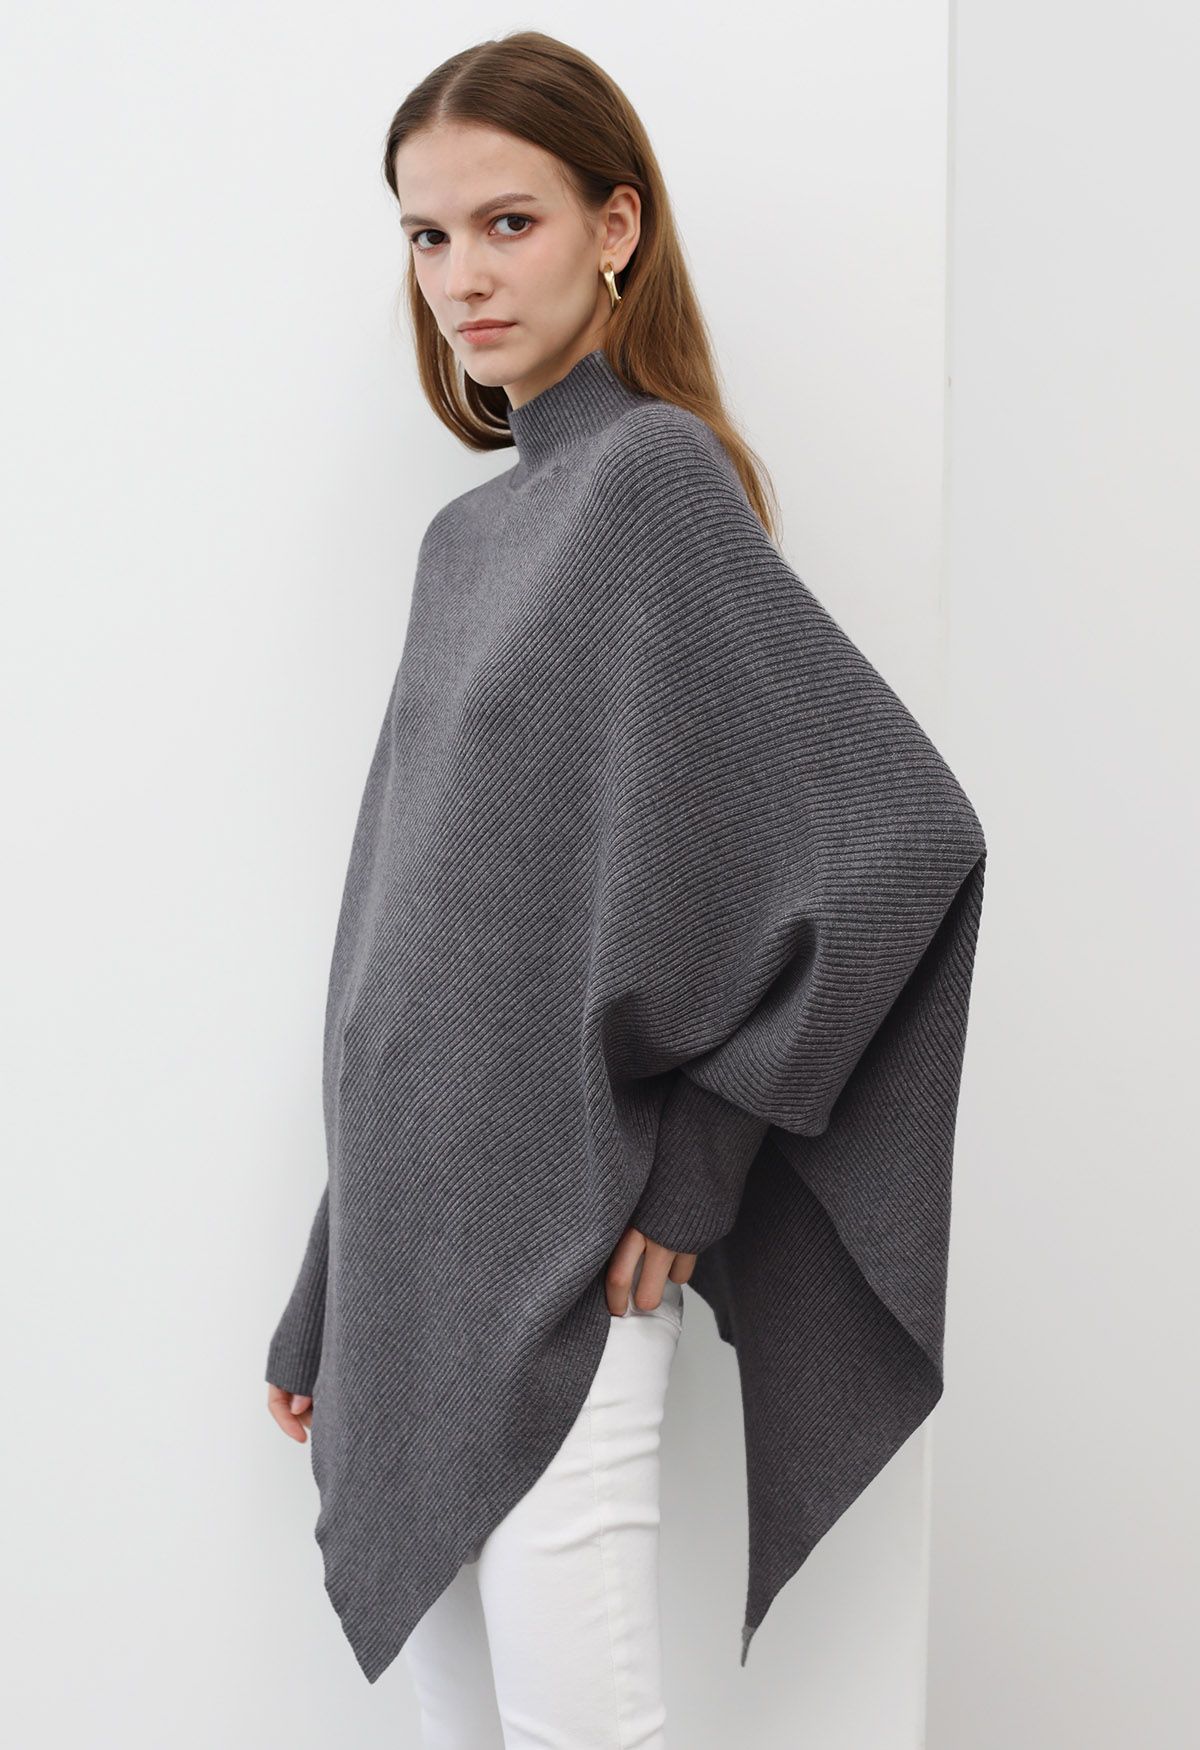 Asymmetric Batwing Sleeve Ribbed Knit Poncho in Grey - Retro, Indie and ...